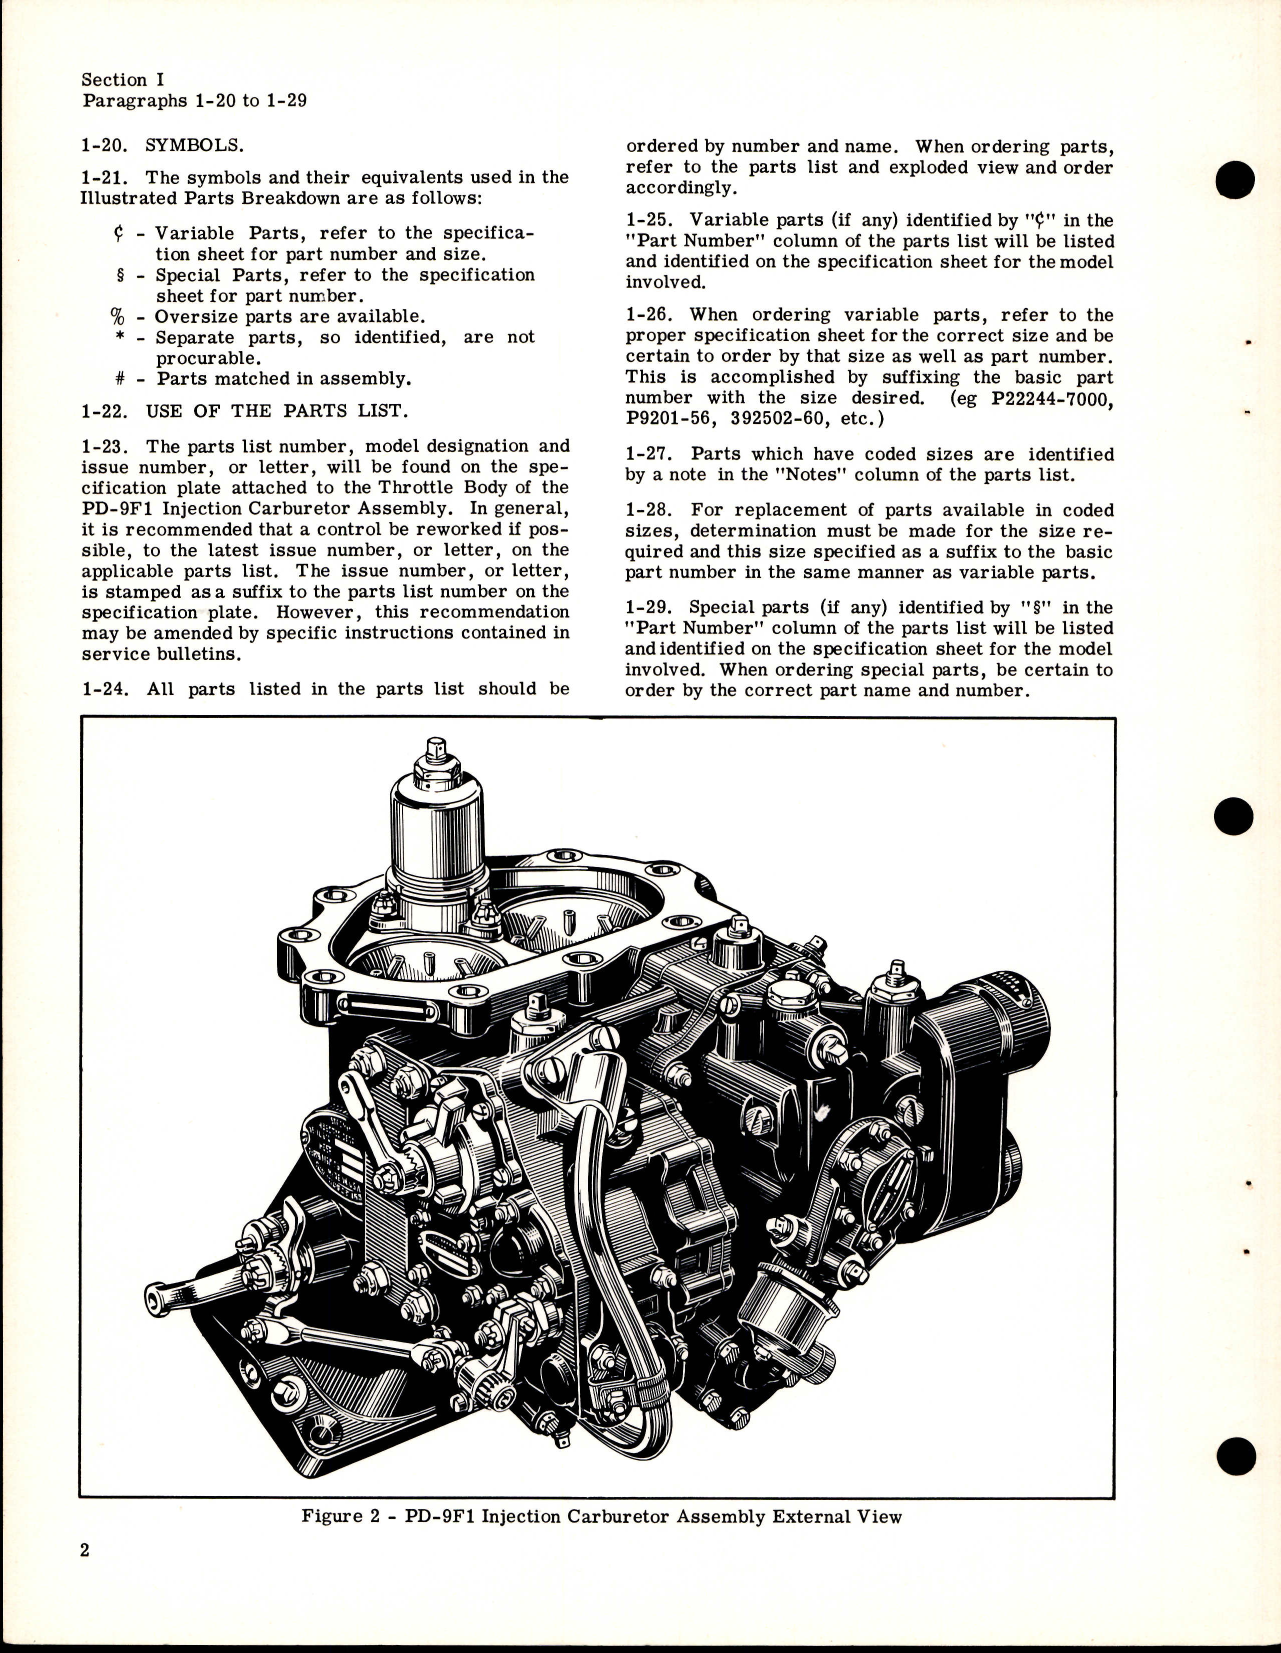 Sample page 6 from AirCorps Library document: Illustrated Parts Breakdown for Stromberg Injection Carburetor Model PD-9F1